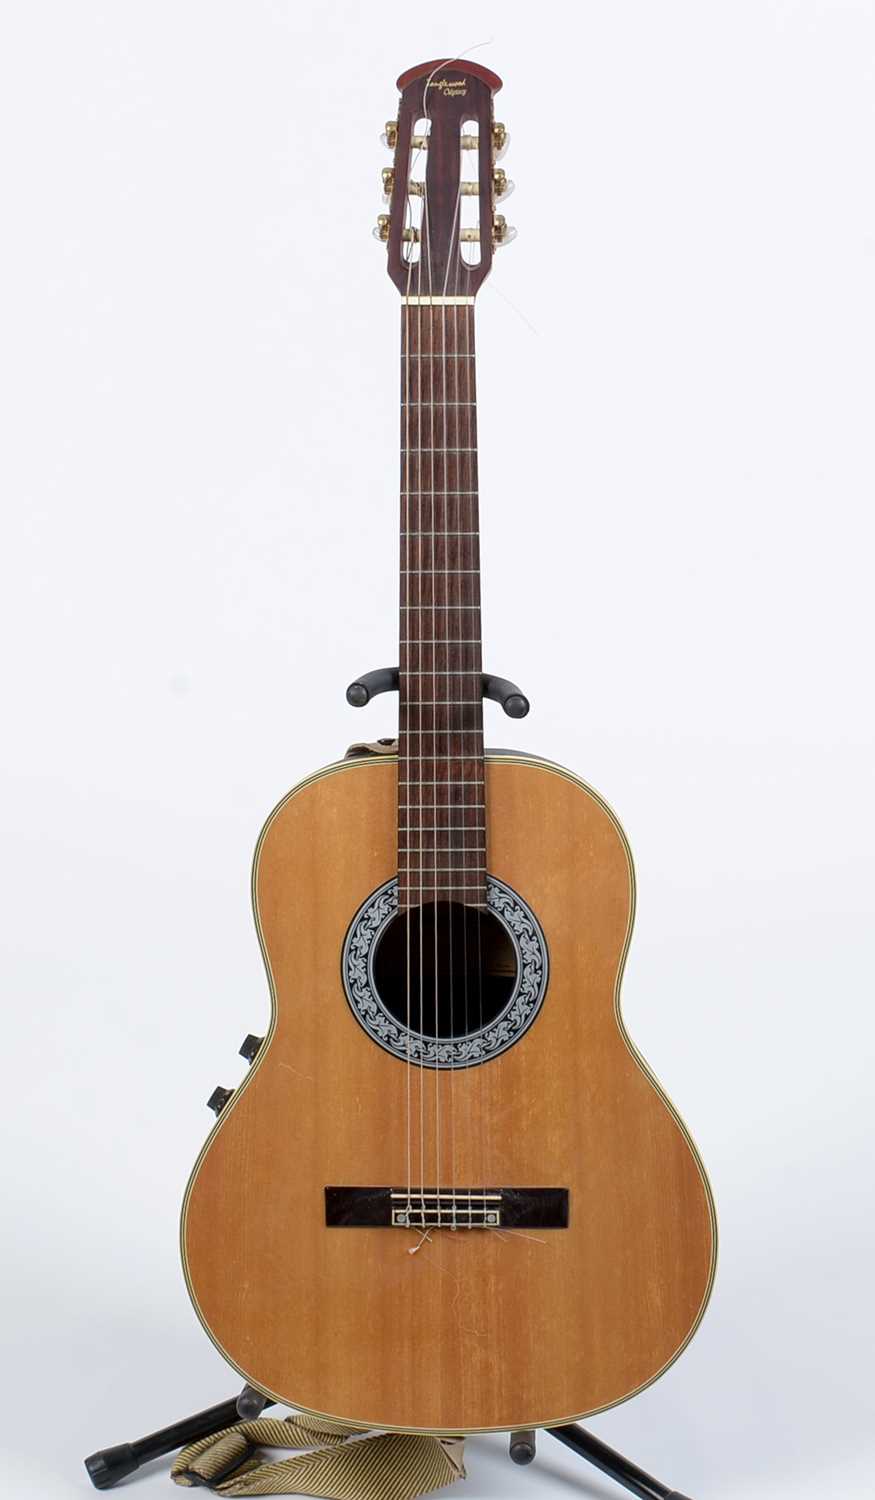 Lot 95 - Tanglewood Odyssey bowl back electro-acoustic Guitar